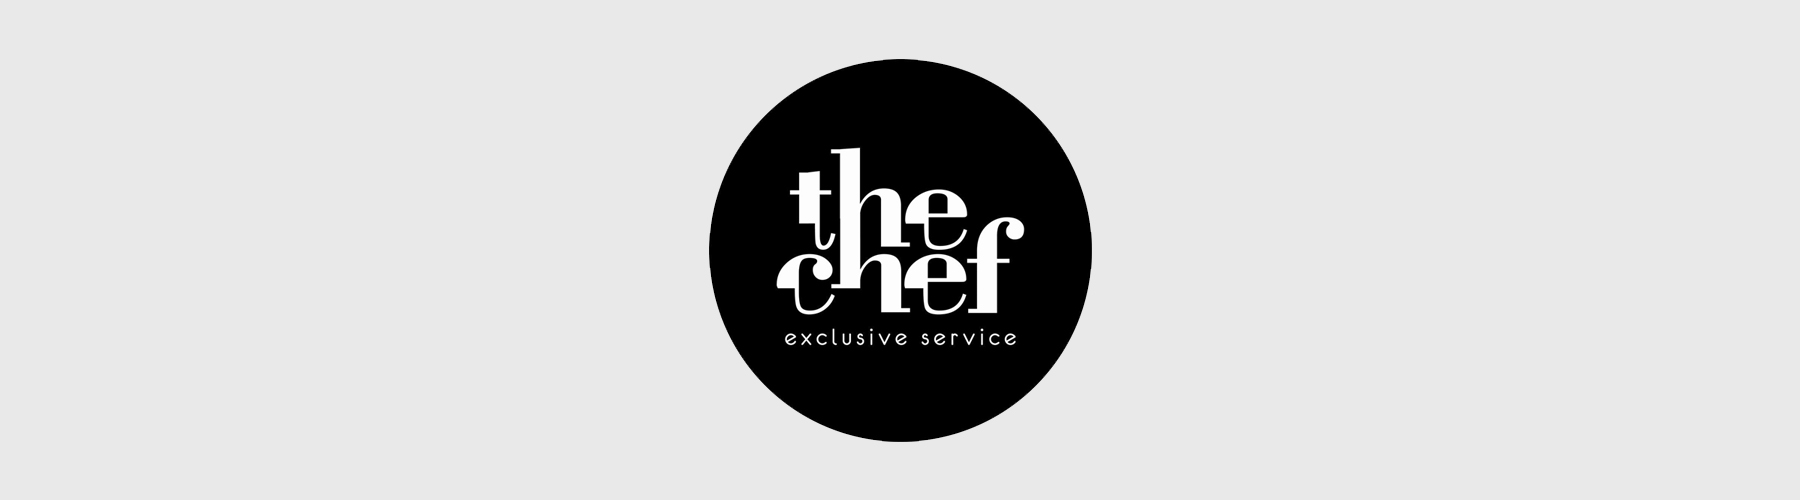 thechef03